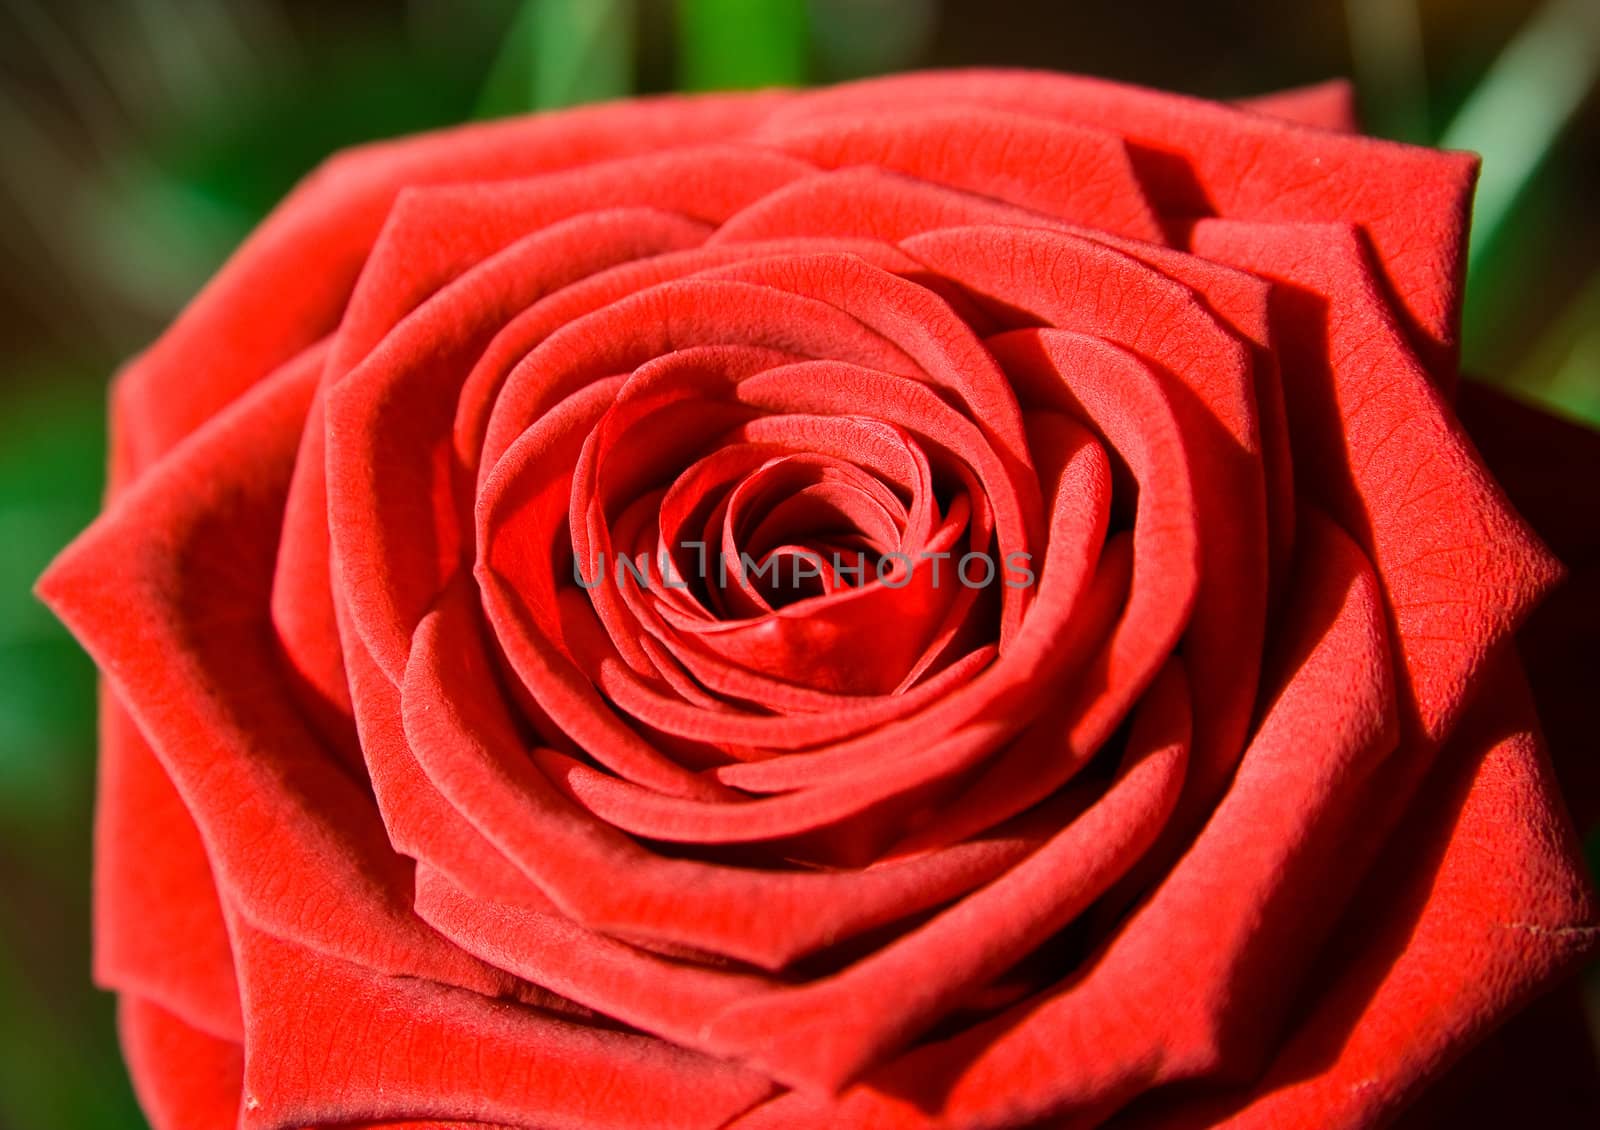 flower: red rose as postcard for example by anobis